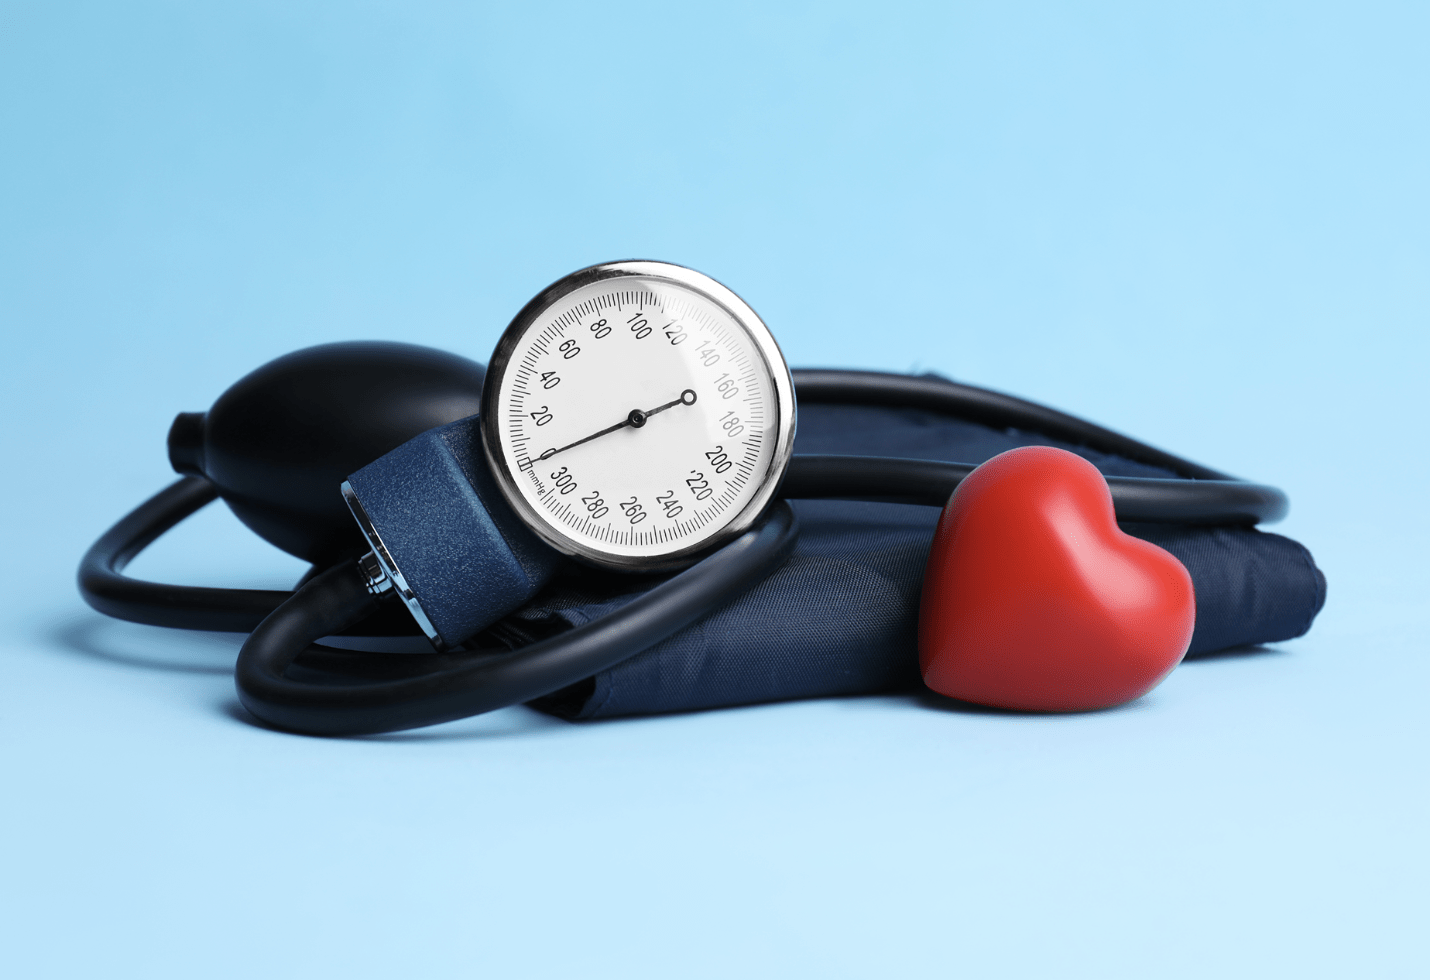 PREHYPERTENSION: A LITTLE TOO MUCH PRESSURE CAN MEAN A LOT OF TROUBLE